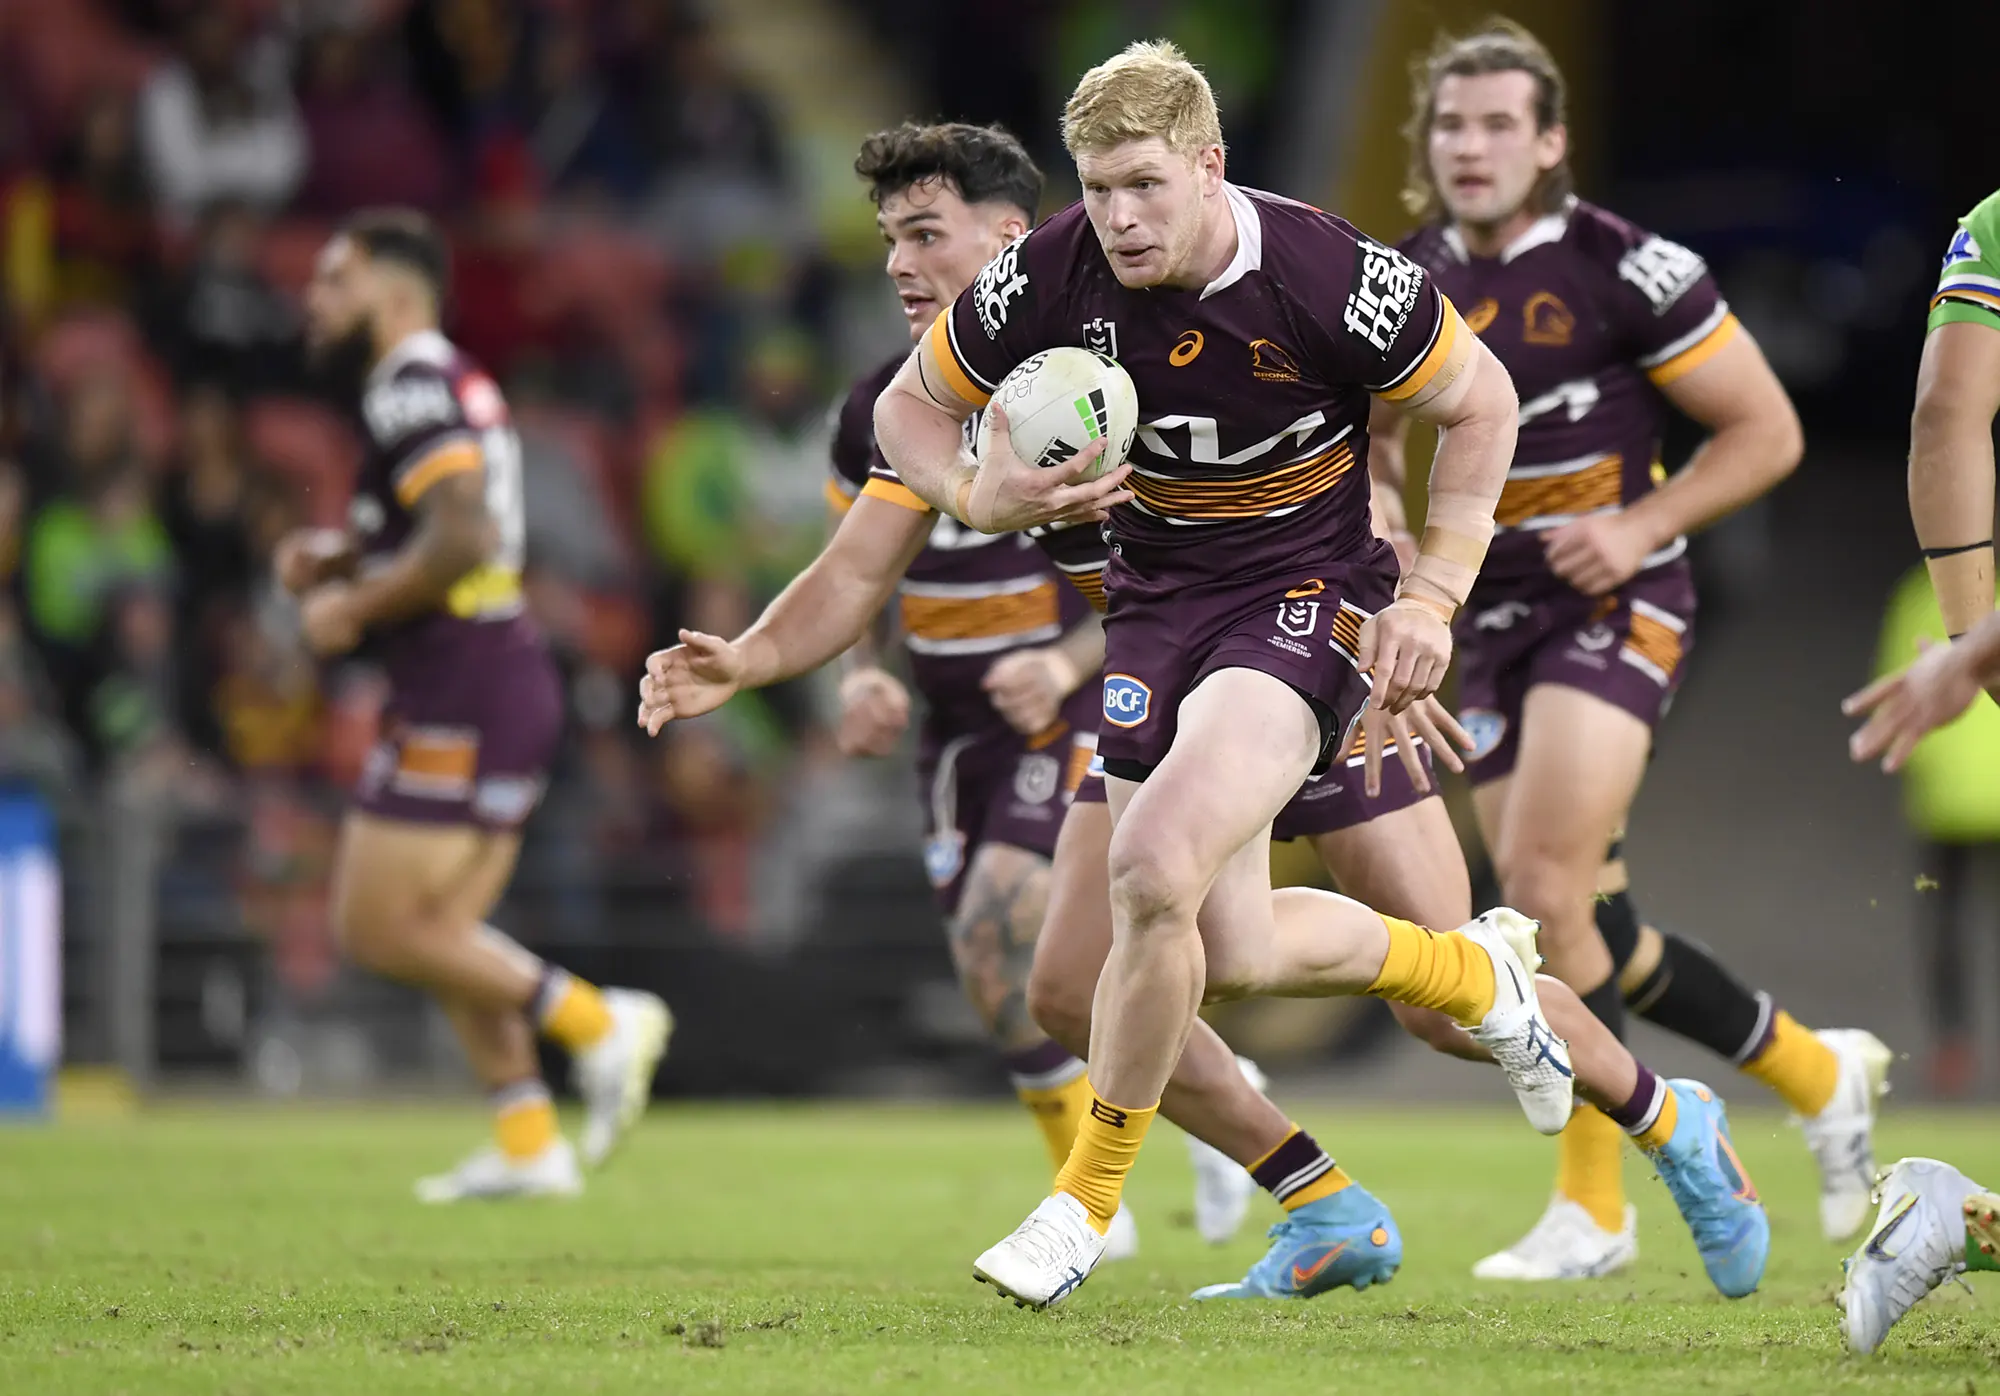 Australian Beef has entered its second year of sponsorship with the Brisbane Broncos - fueling athletes and every day Australians on and off the field